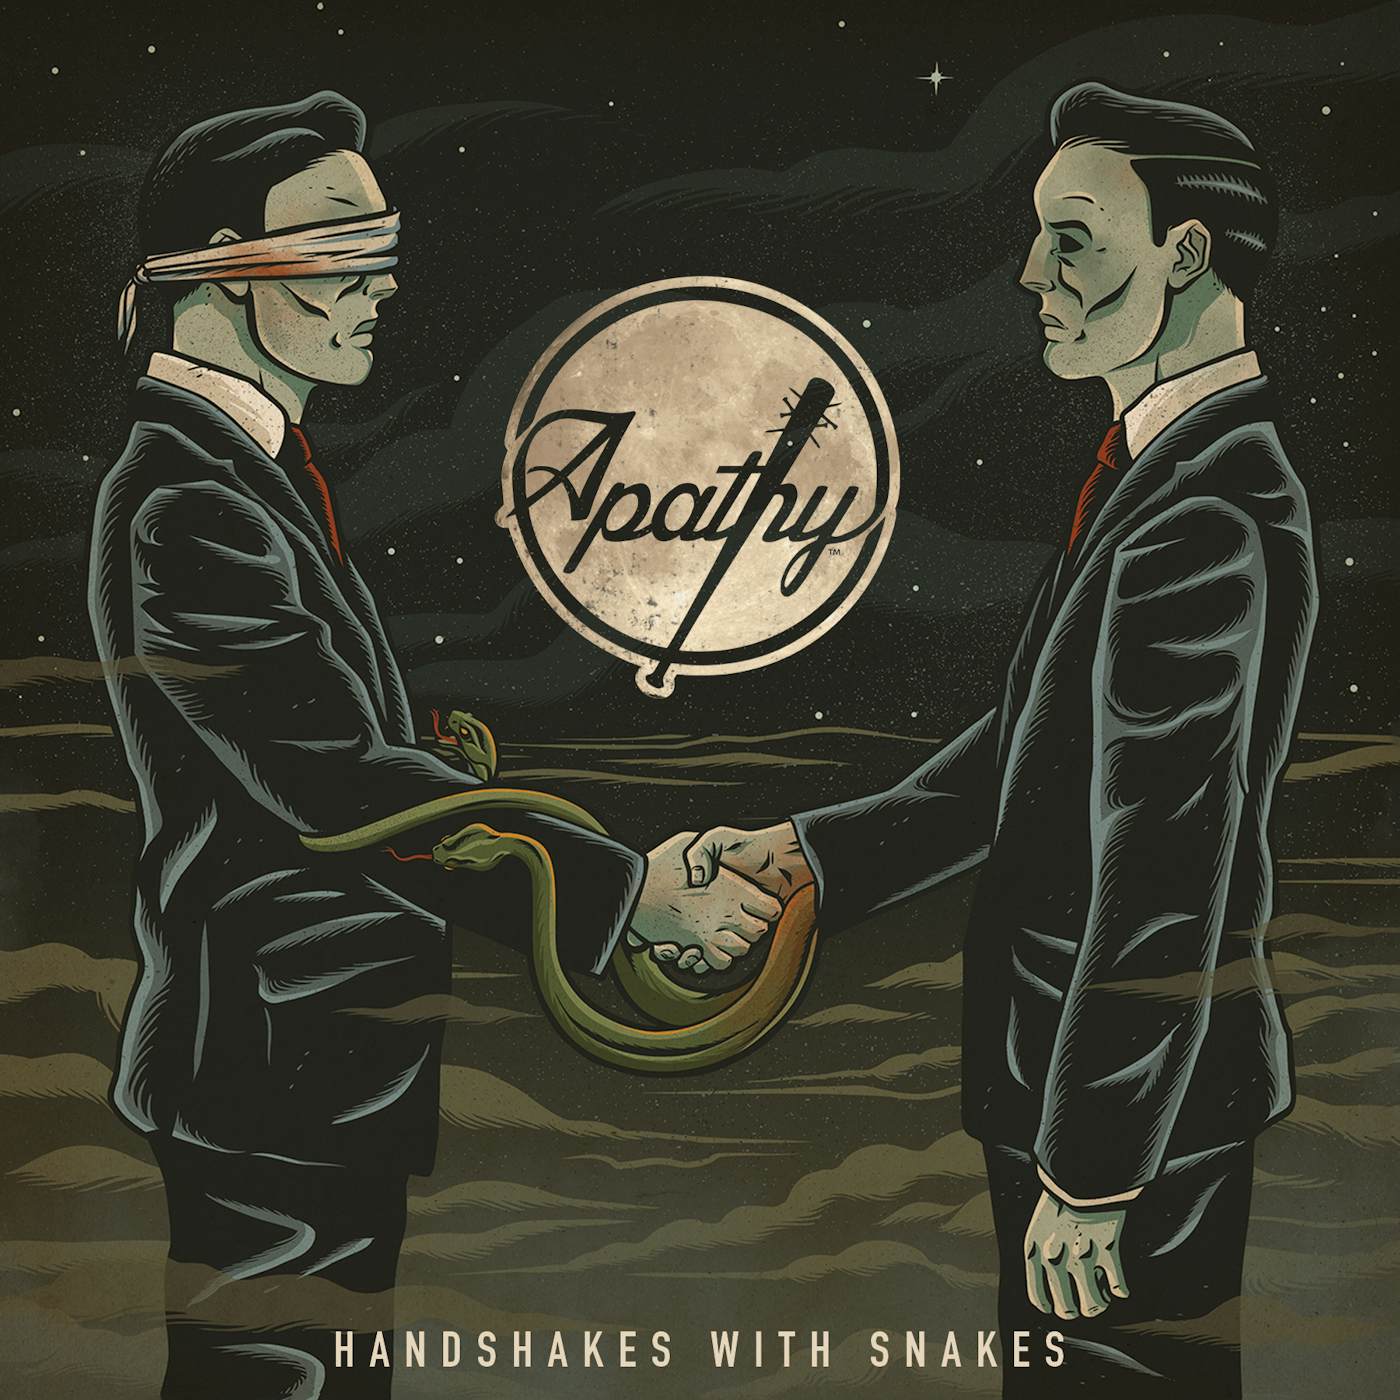 Apathy HANDSHAKES WITH SNAKES CD